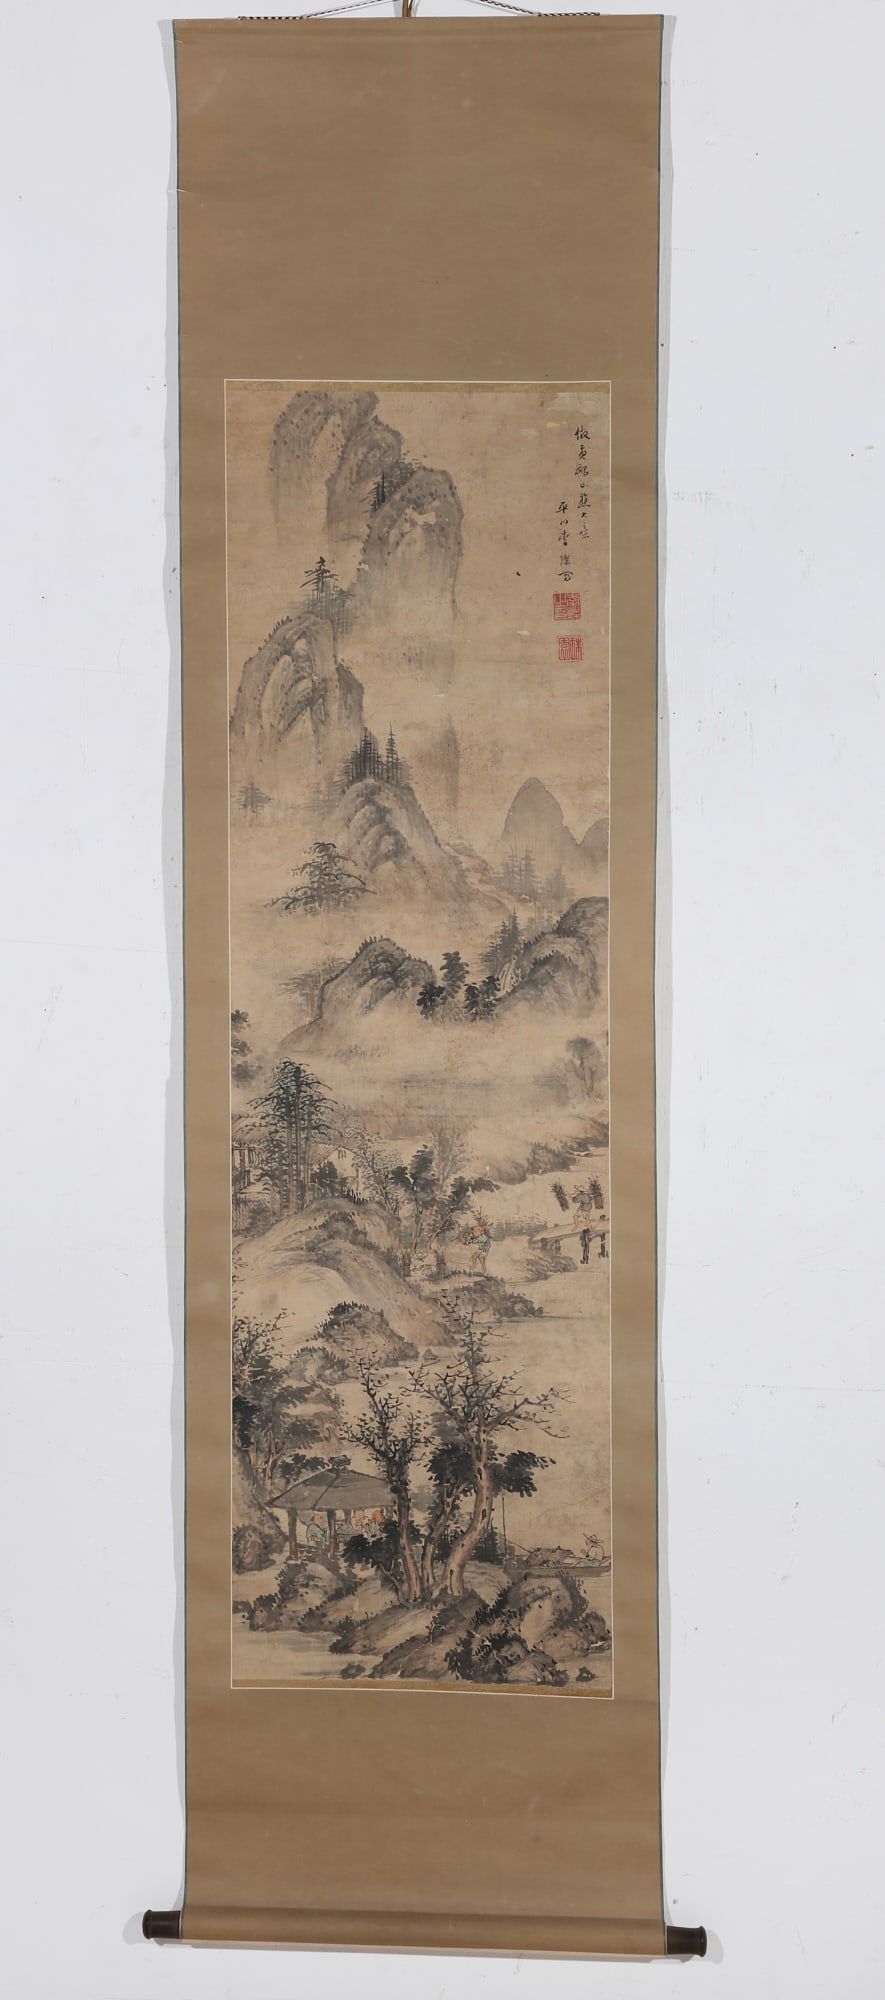 A CHINESE SCROLL PAINTING, ATTRIBUTED